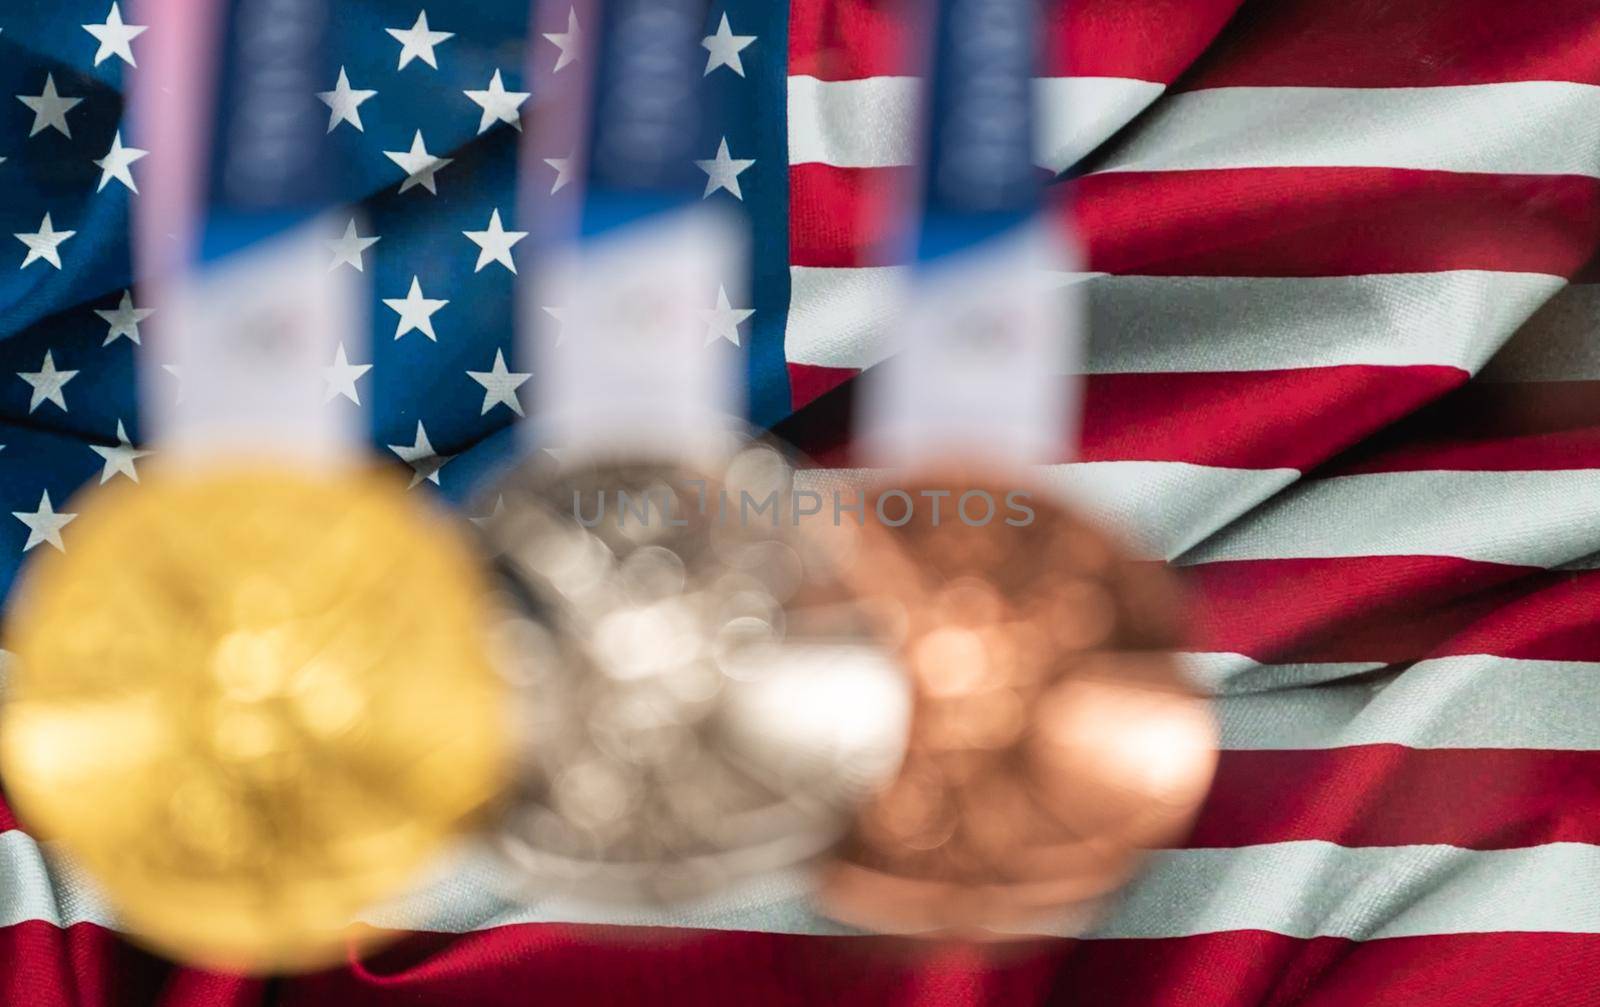 April 25, 2021 Tokyo, Japan. Gold, silver and bronze medals of the XXXII Summer Olympic Games 2020 in Tokyo on the background of the US flag.